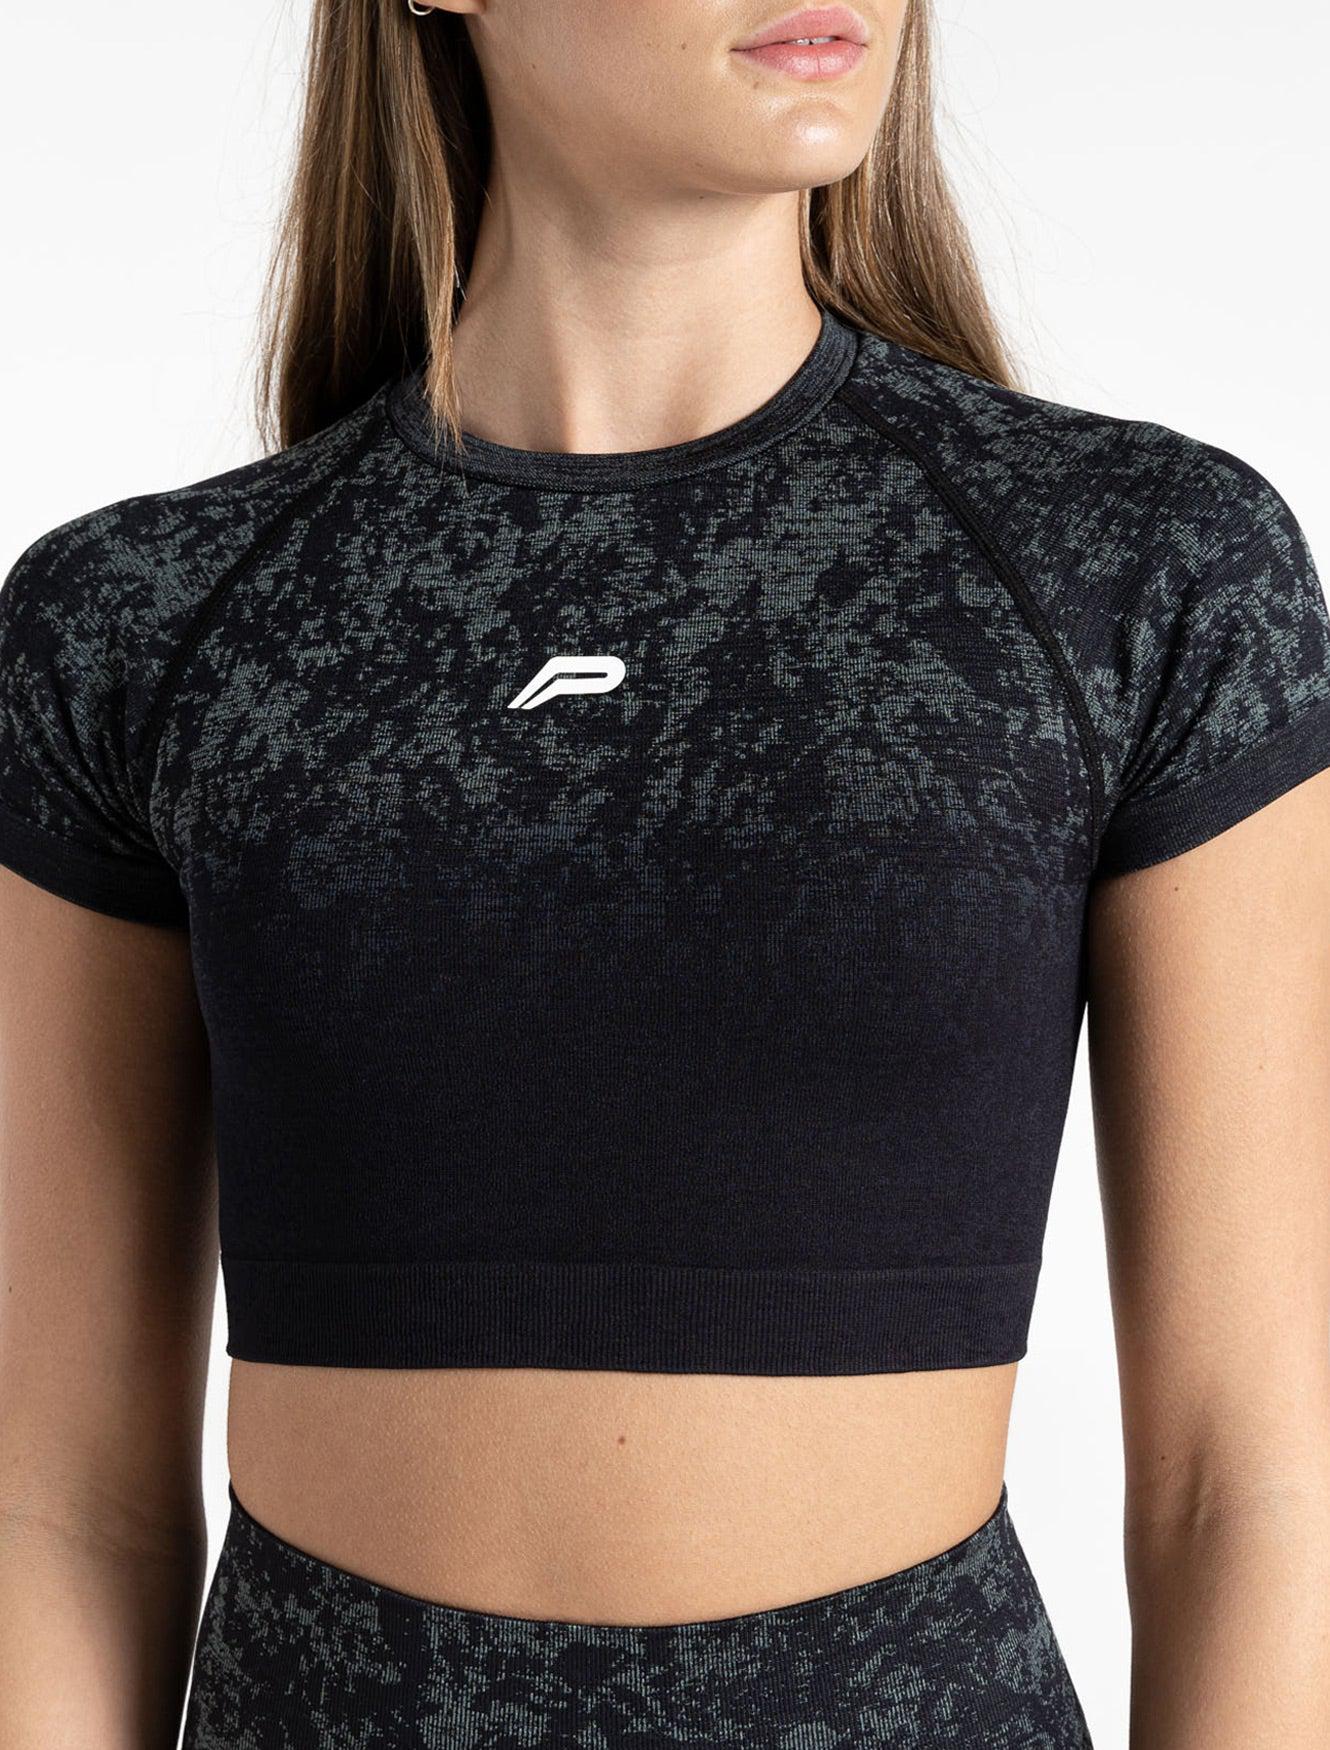 Cosmic Seamless Crop Top / Black Ombre Pursue Fitness 3